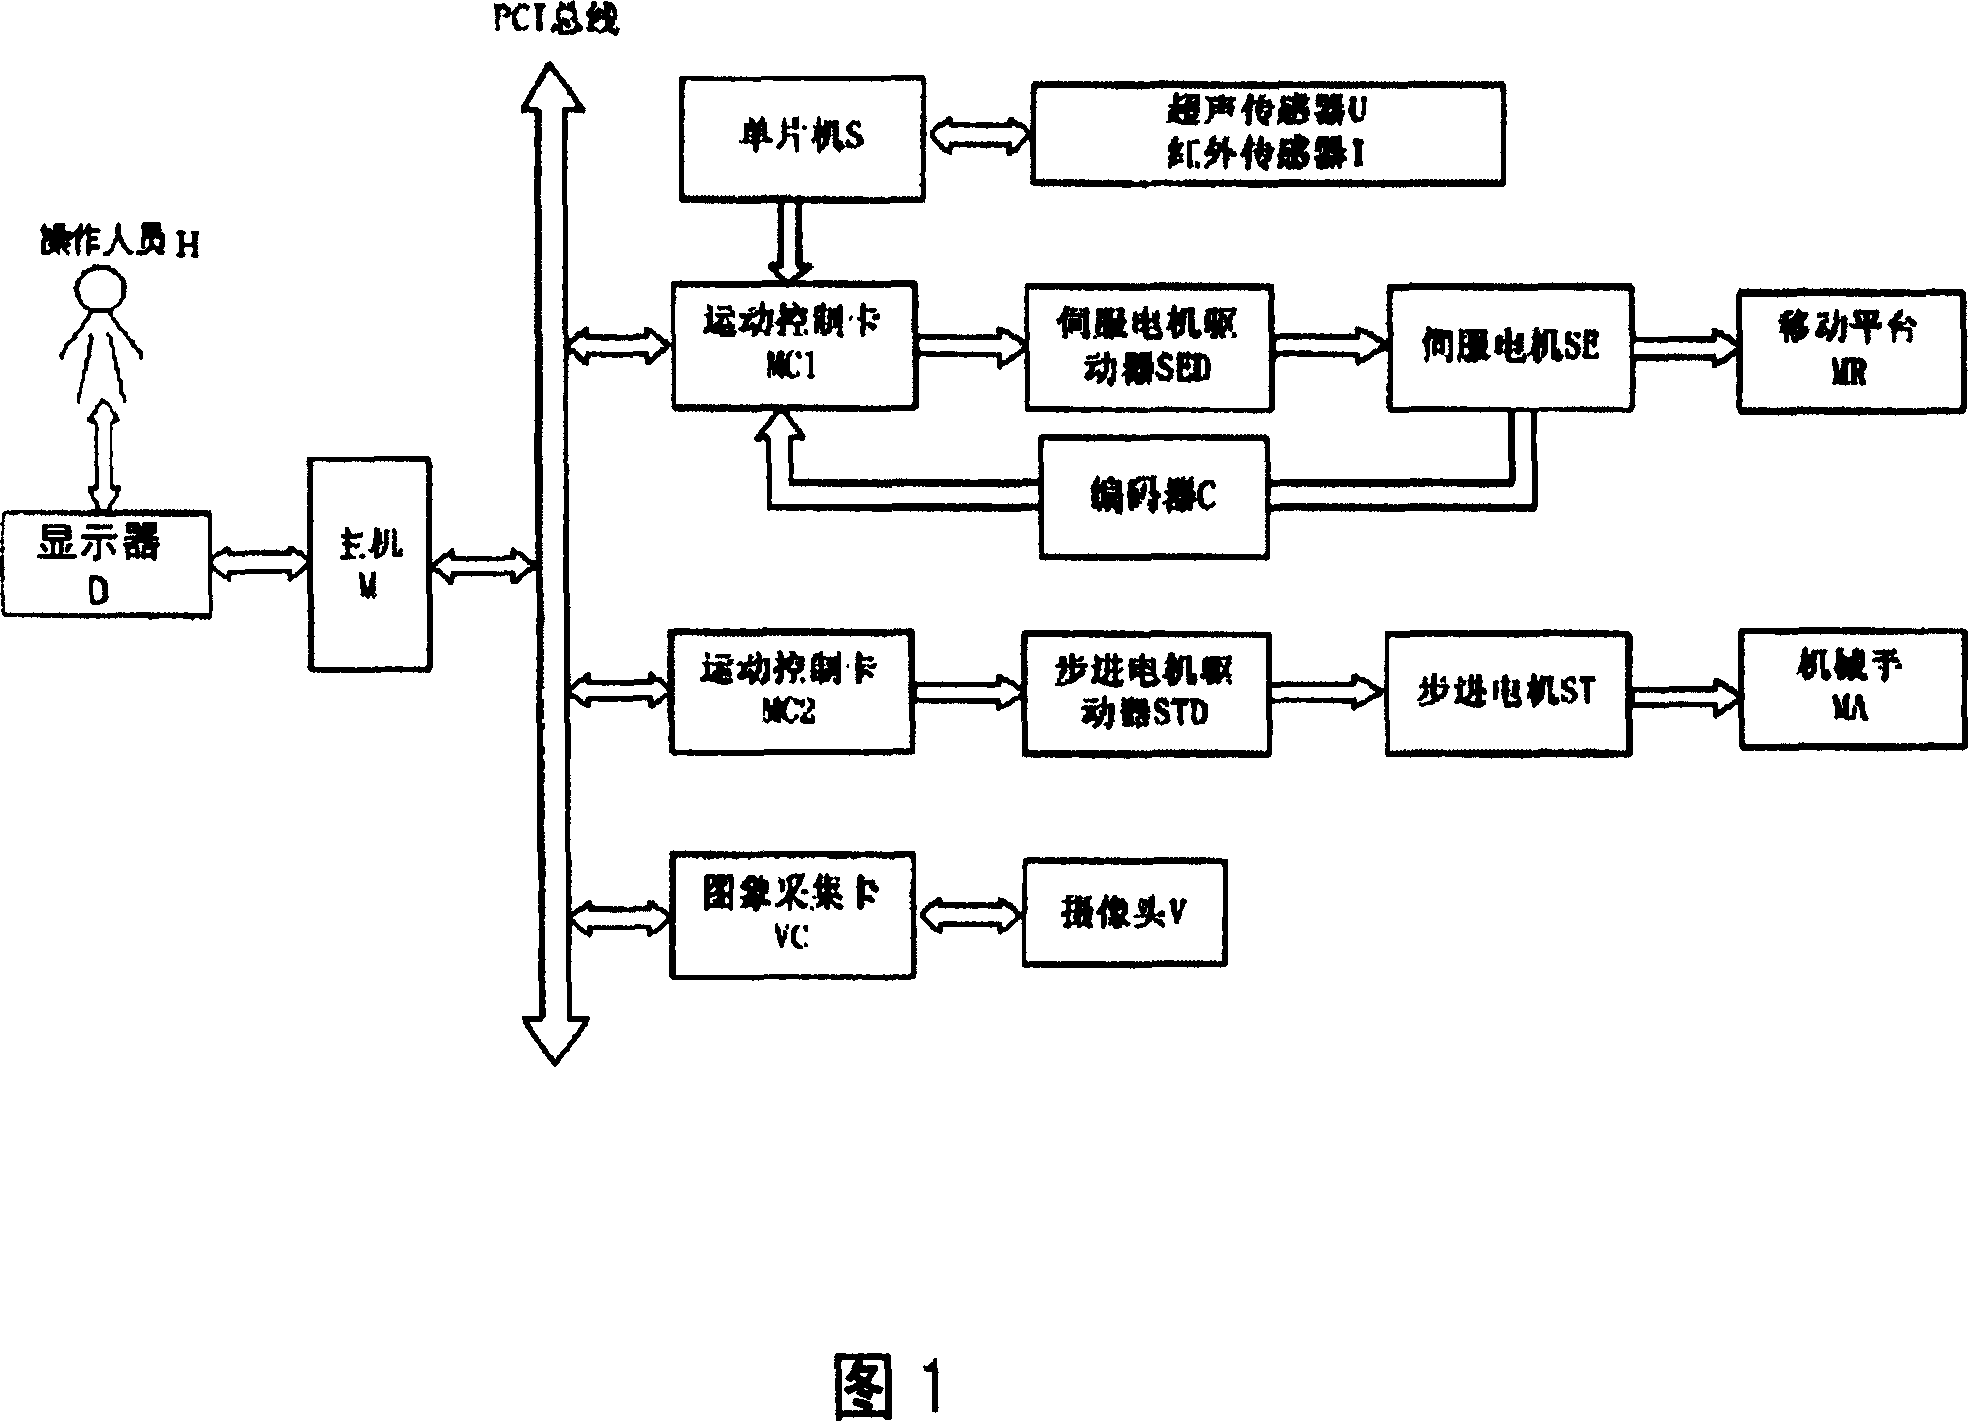 Controlling system of movable manipulator